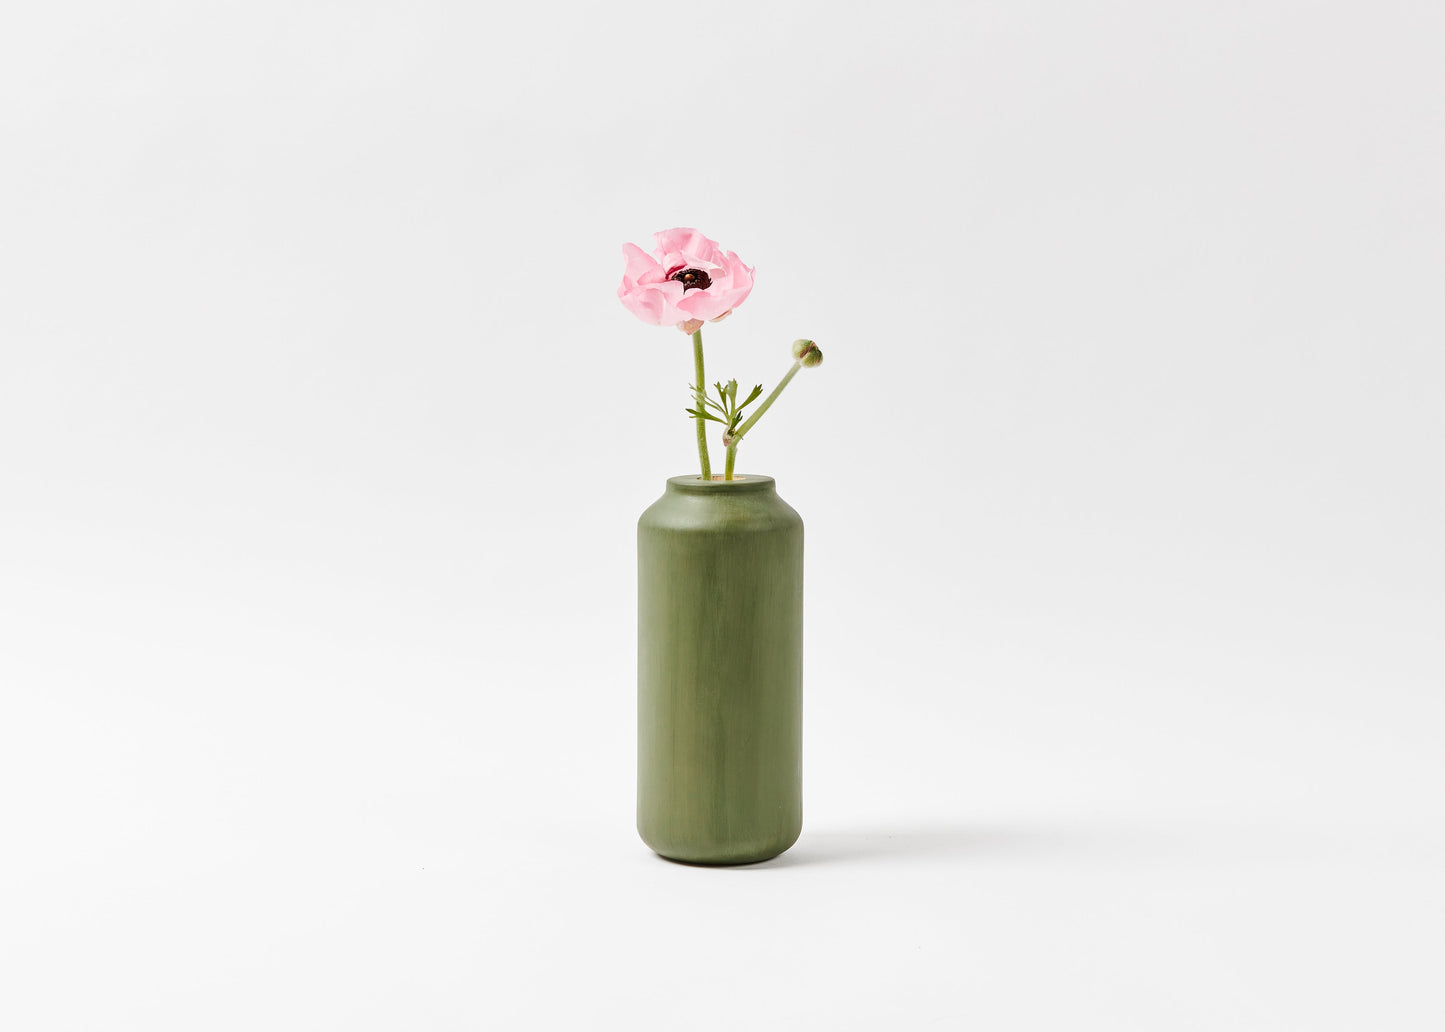 Tall & Wide vase hand painted in sage green. The vase has a pink flower inside with a white background. By Melanie Abrantes Designs.